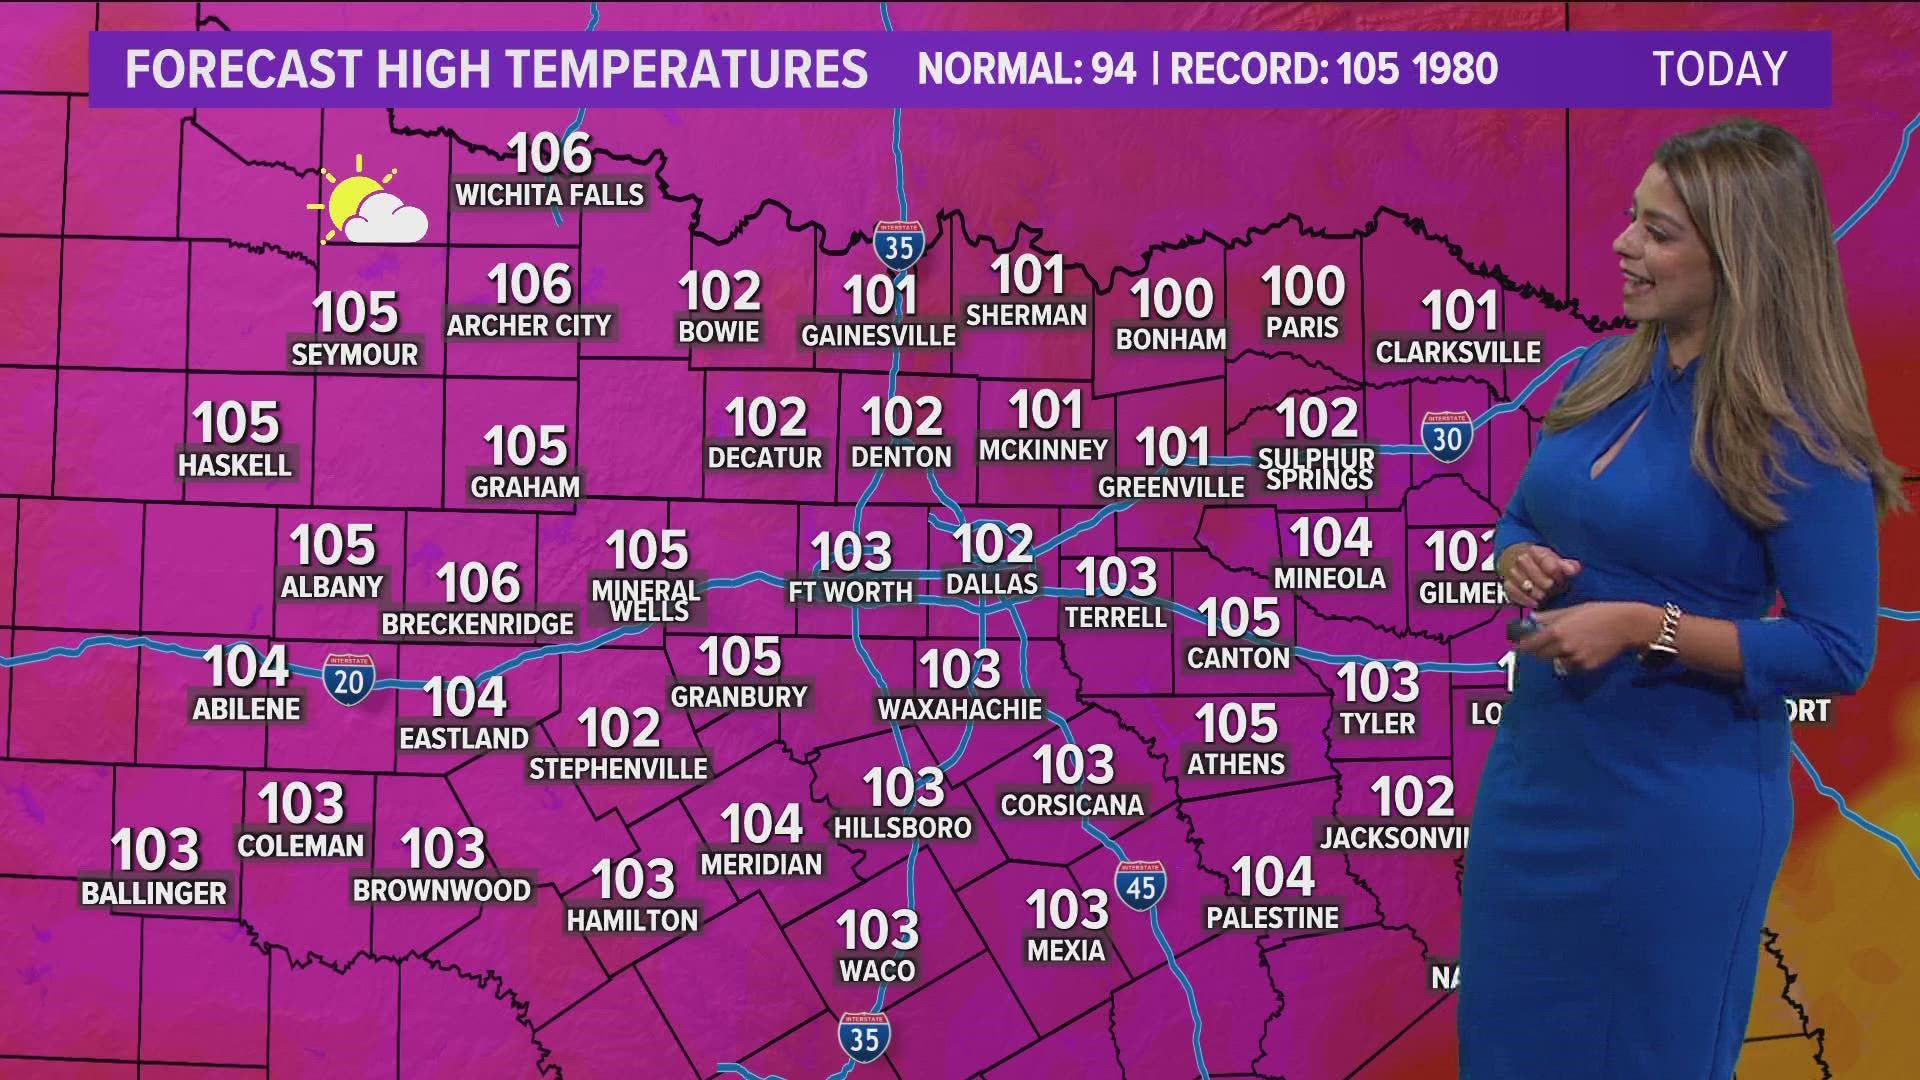 Triple-digit heat has returned to North Texas and doesn't look to be going away anytime soon. A Heat Advisory is in effect Wednesday through Friday.